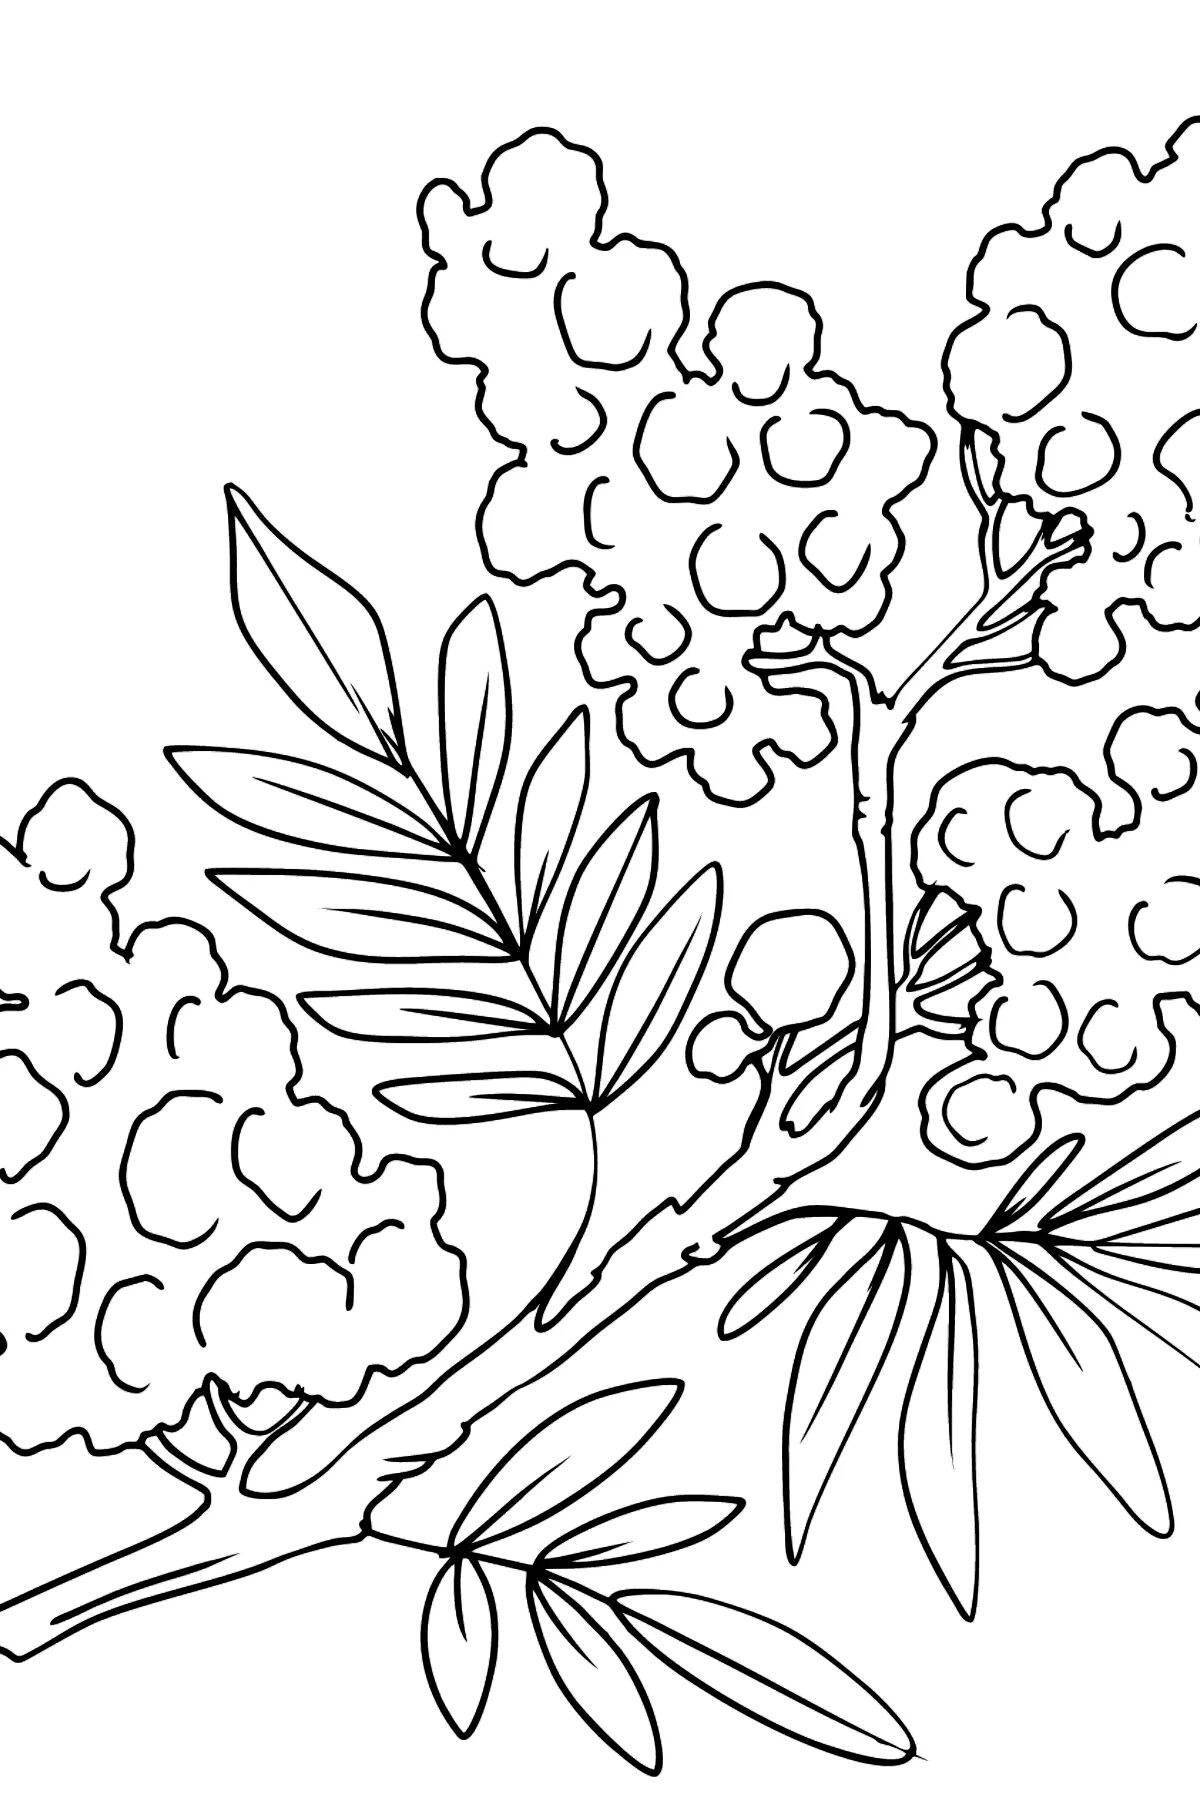 Playful Mimosa Coloring Page for Toddlers